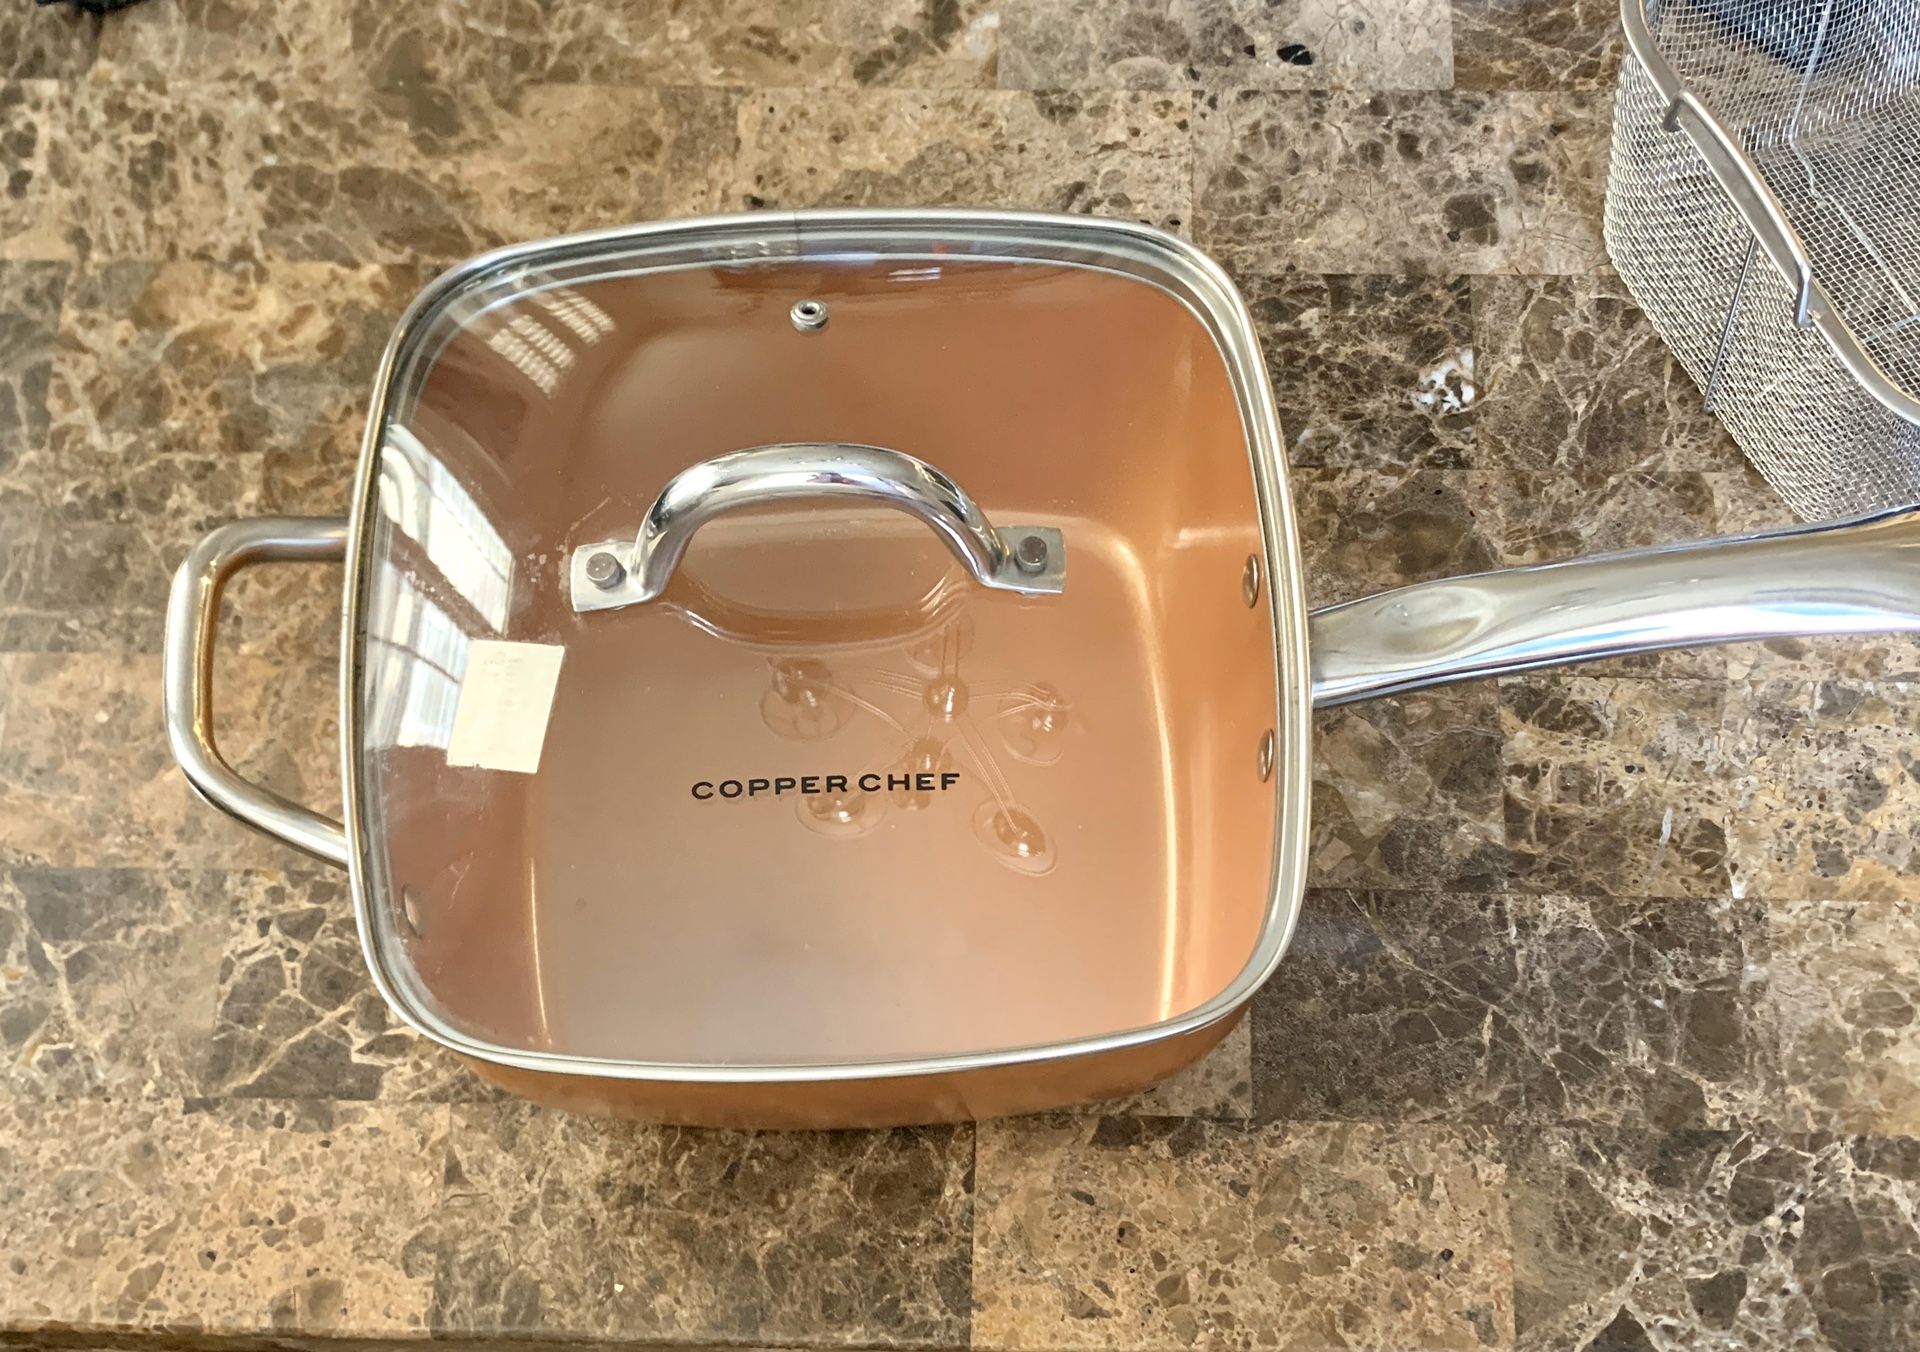 Copper Chef pan with lid & steam/fry basket